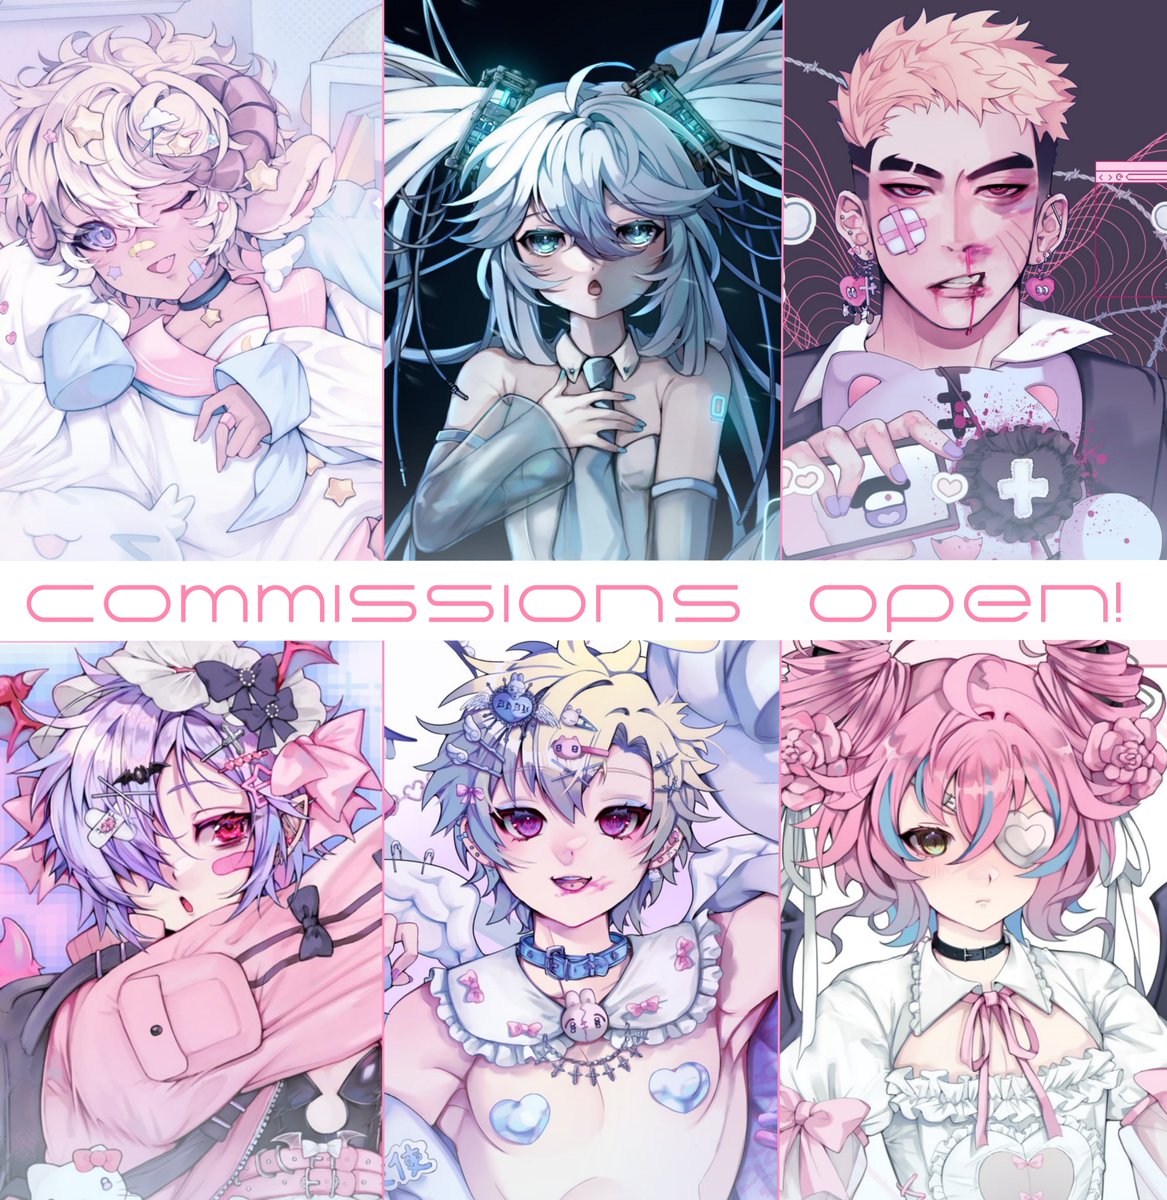 Comms are open! L*nk is in my bio and I will post it below! Only one slot open, but I will go through the responses, so please take your time!